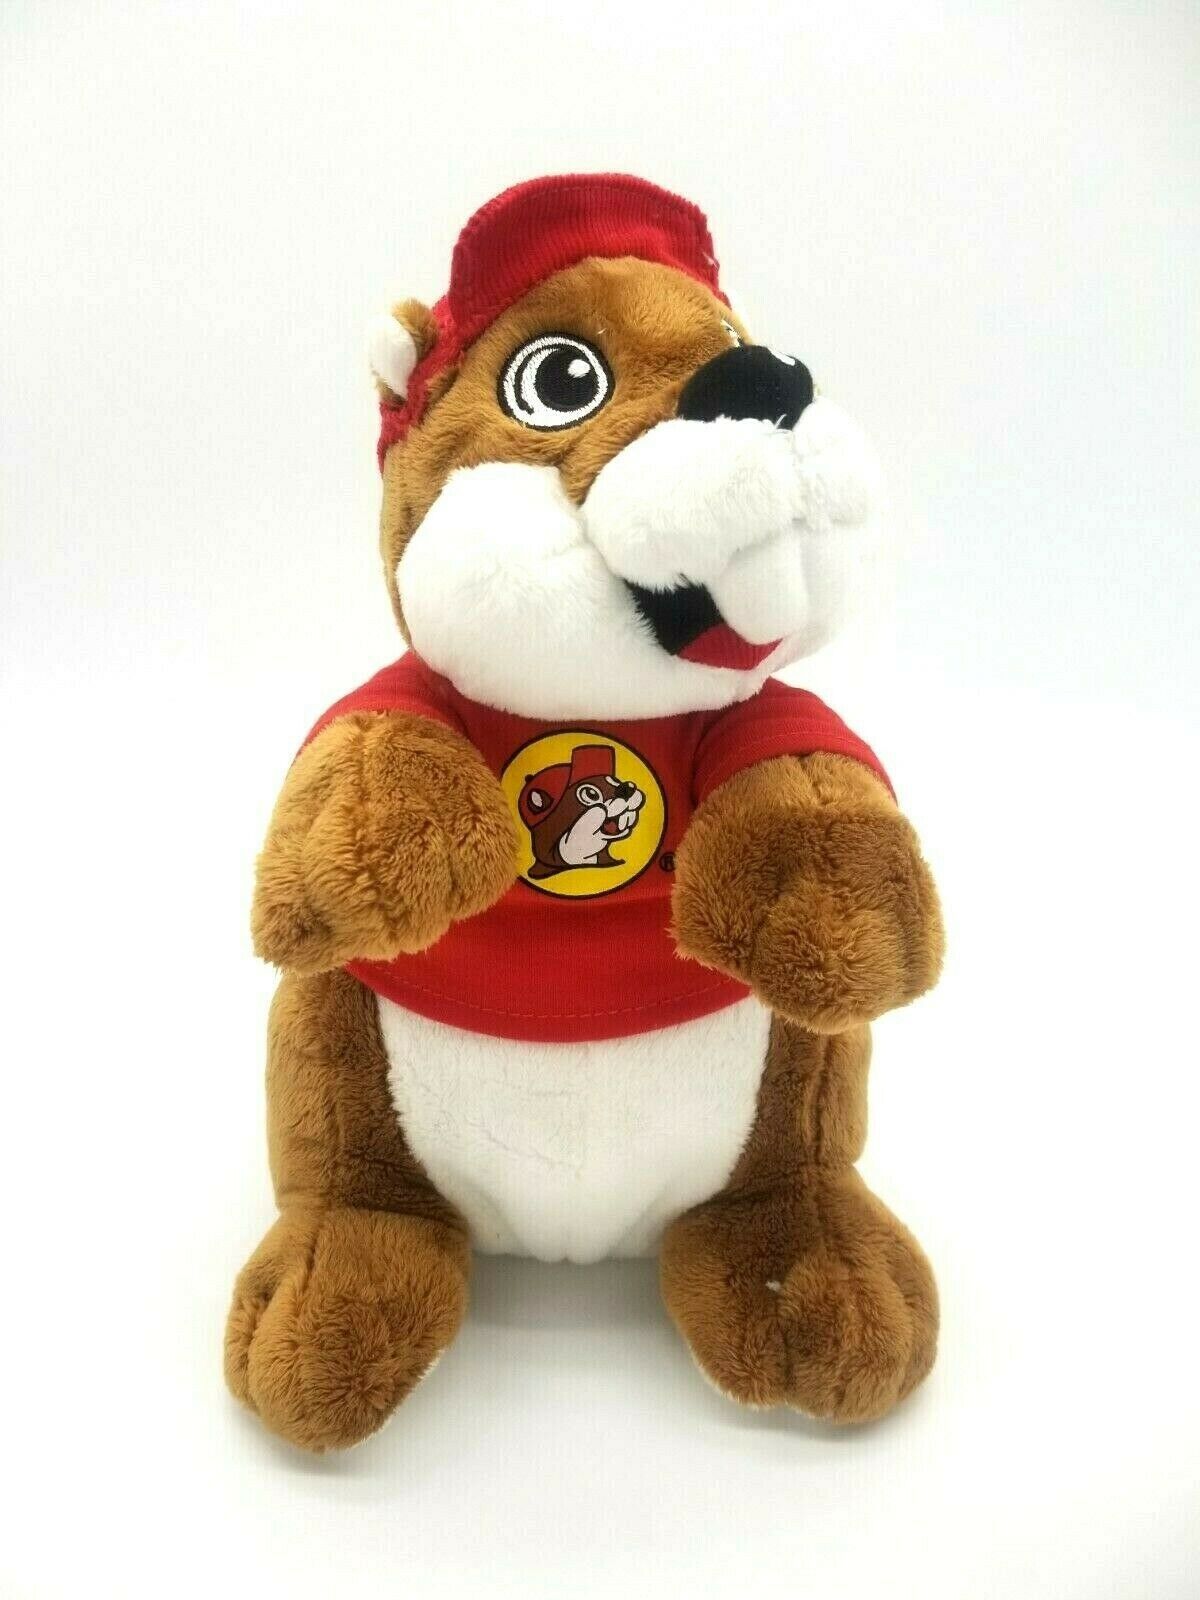 Buc-ees Plush Bucky The Beaver Stuffed Animal, Ages 3 and Up, 12 Inches Tall